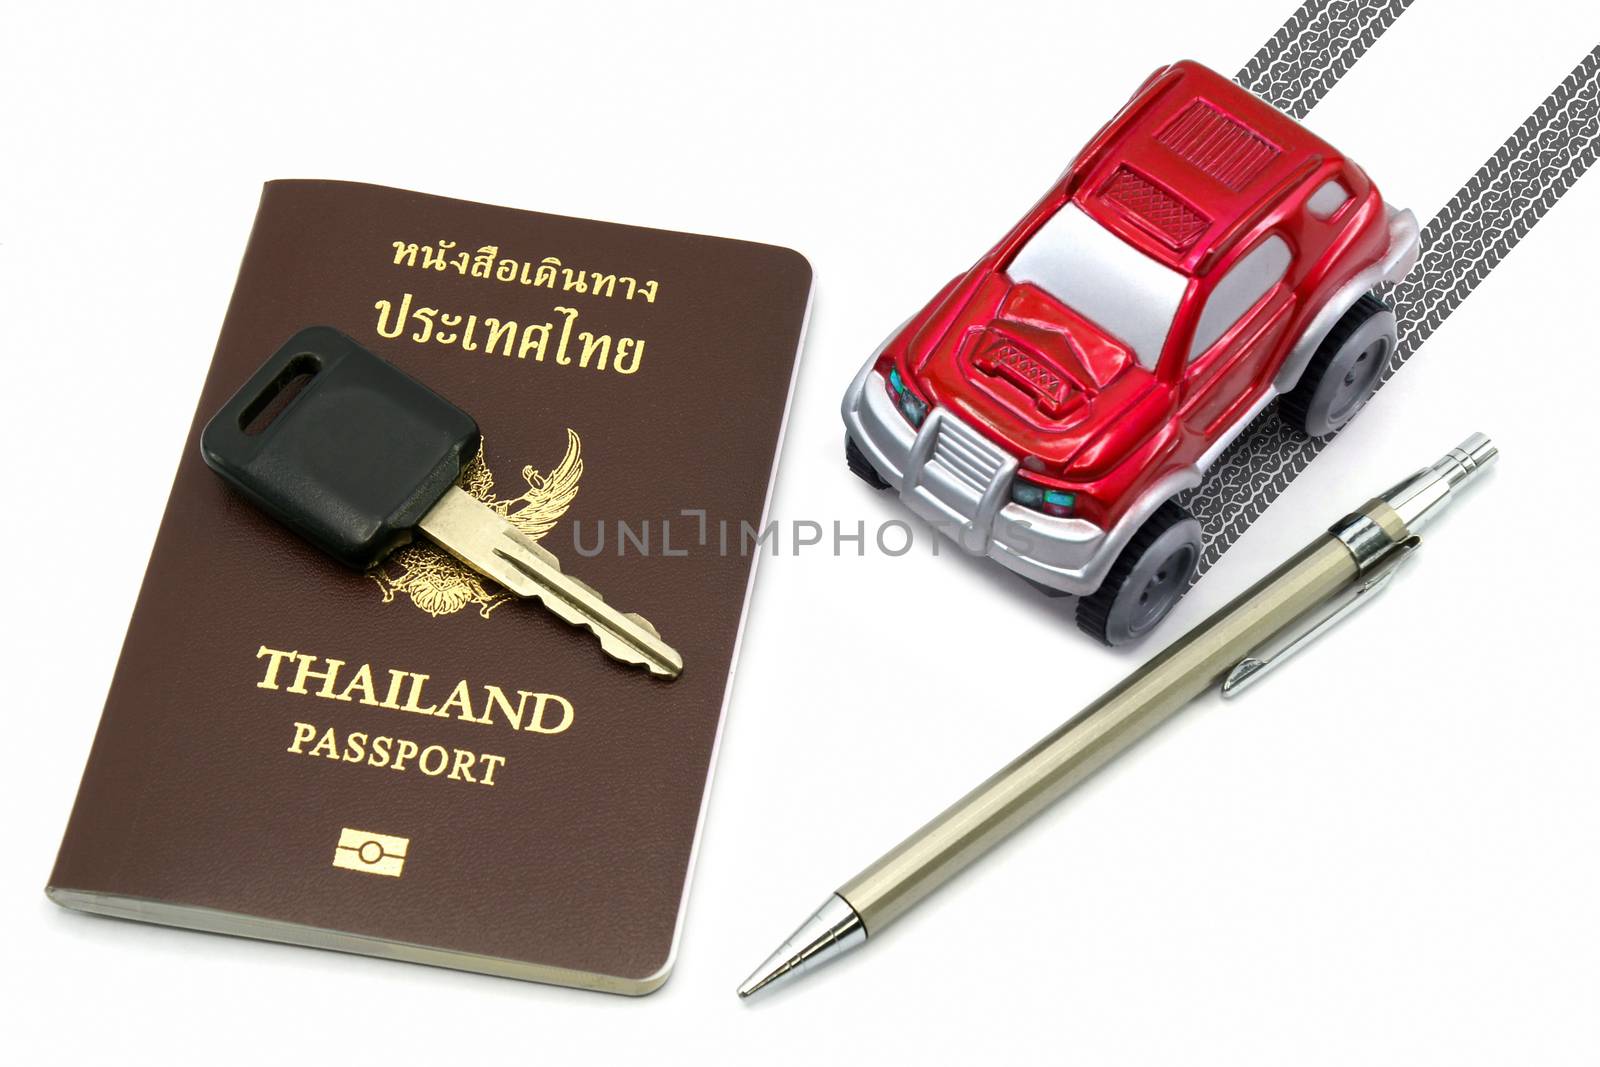 Thailand passport, key, pen and red 4wd car for travel concept by mranucha